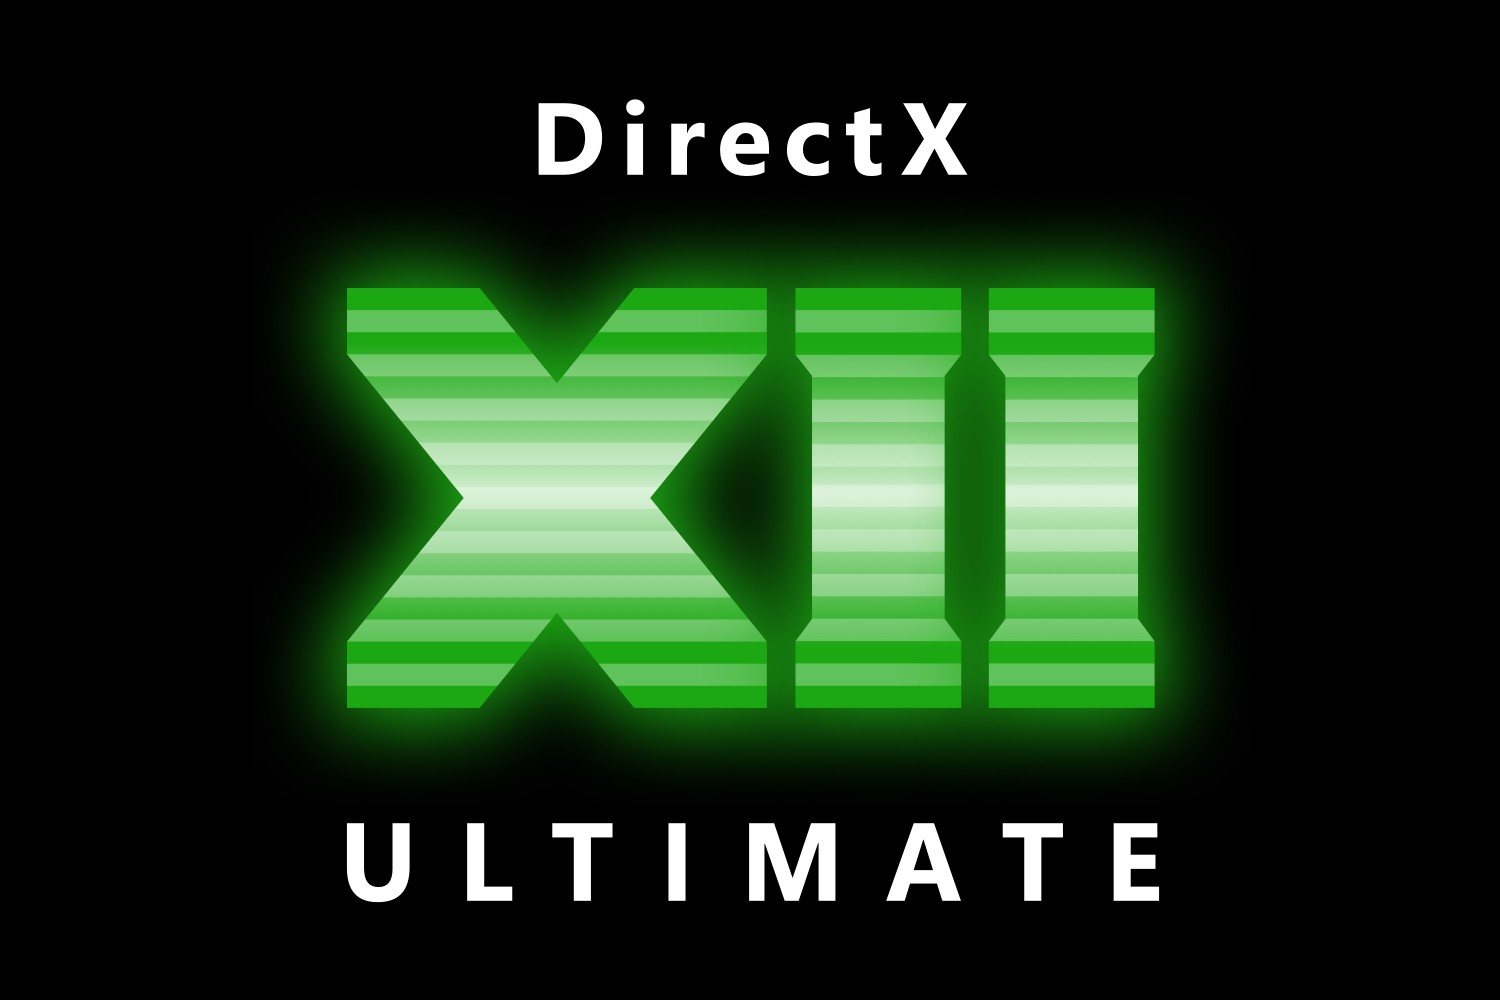 The current state of DirectX 12 in PC gaming, was it worth the hype?